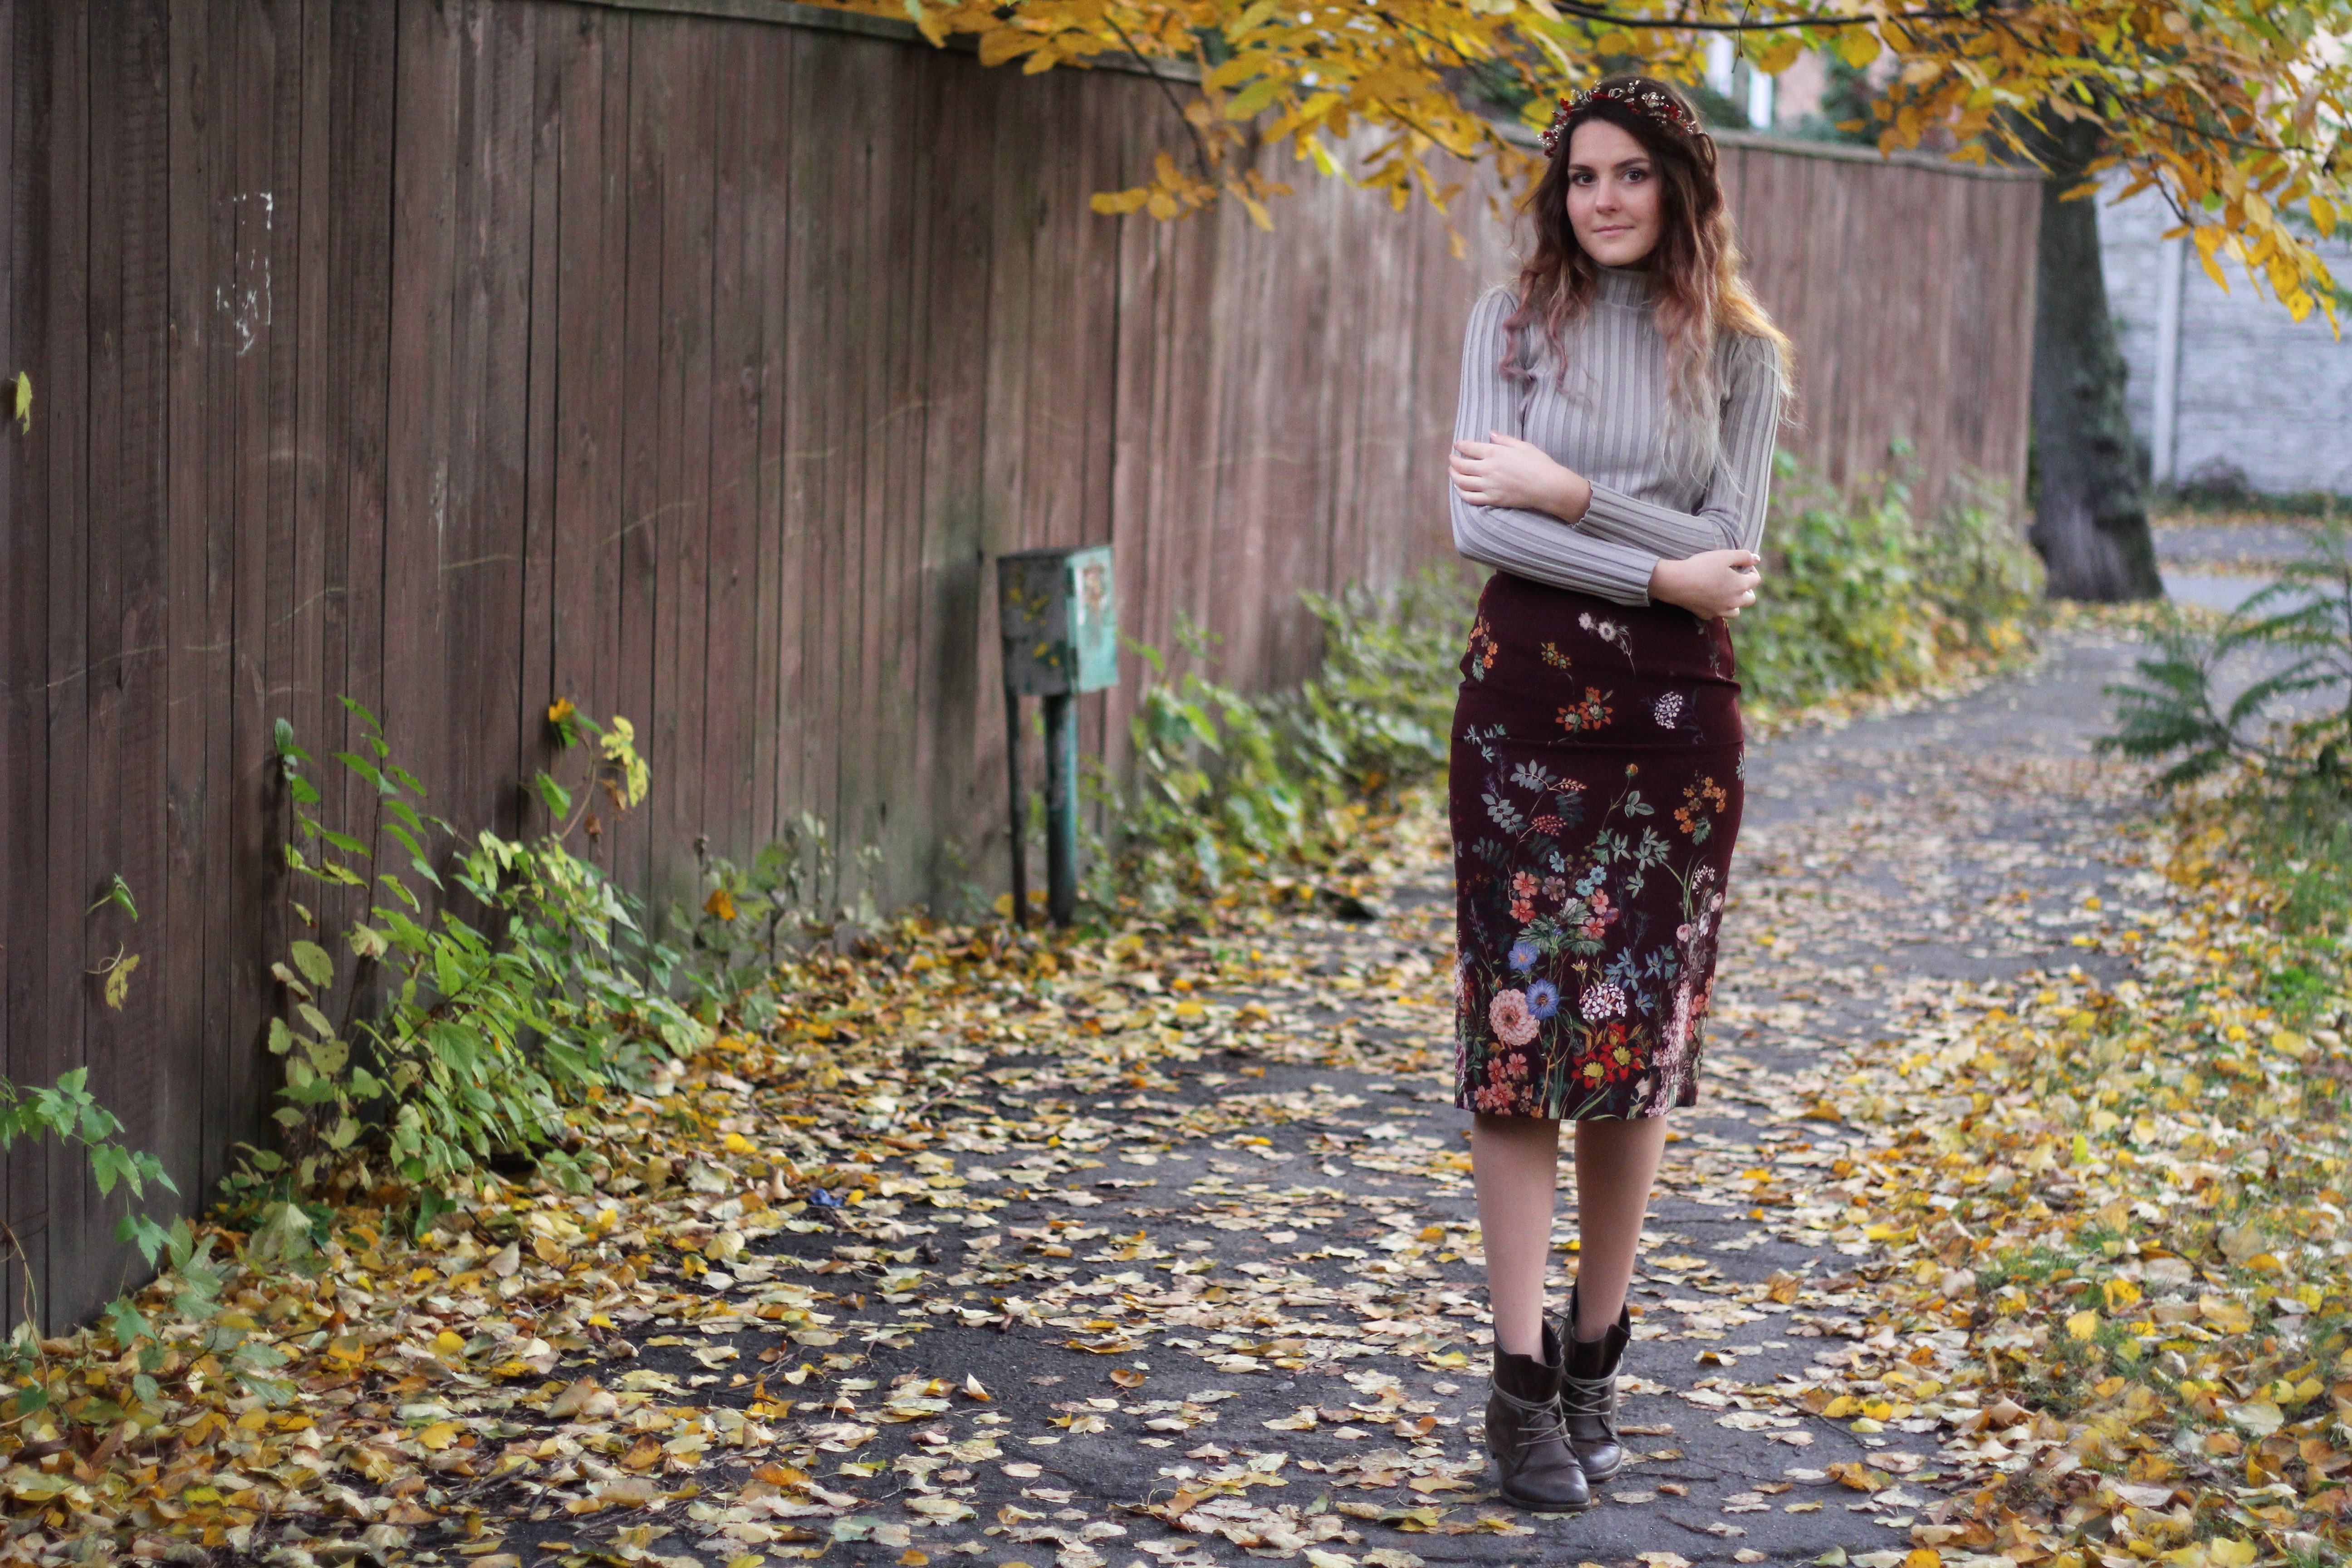 A beautiful fall inspired picture with a girl in a skirt with flowers